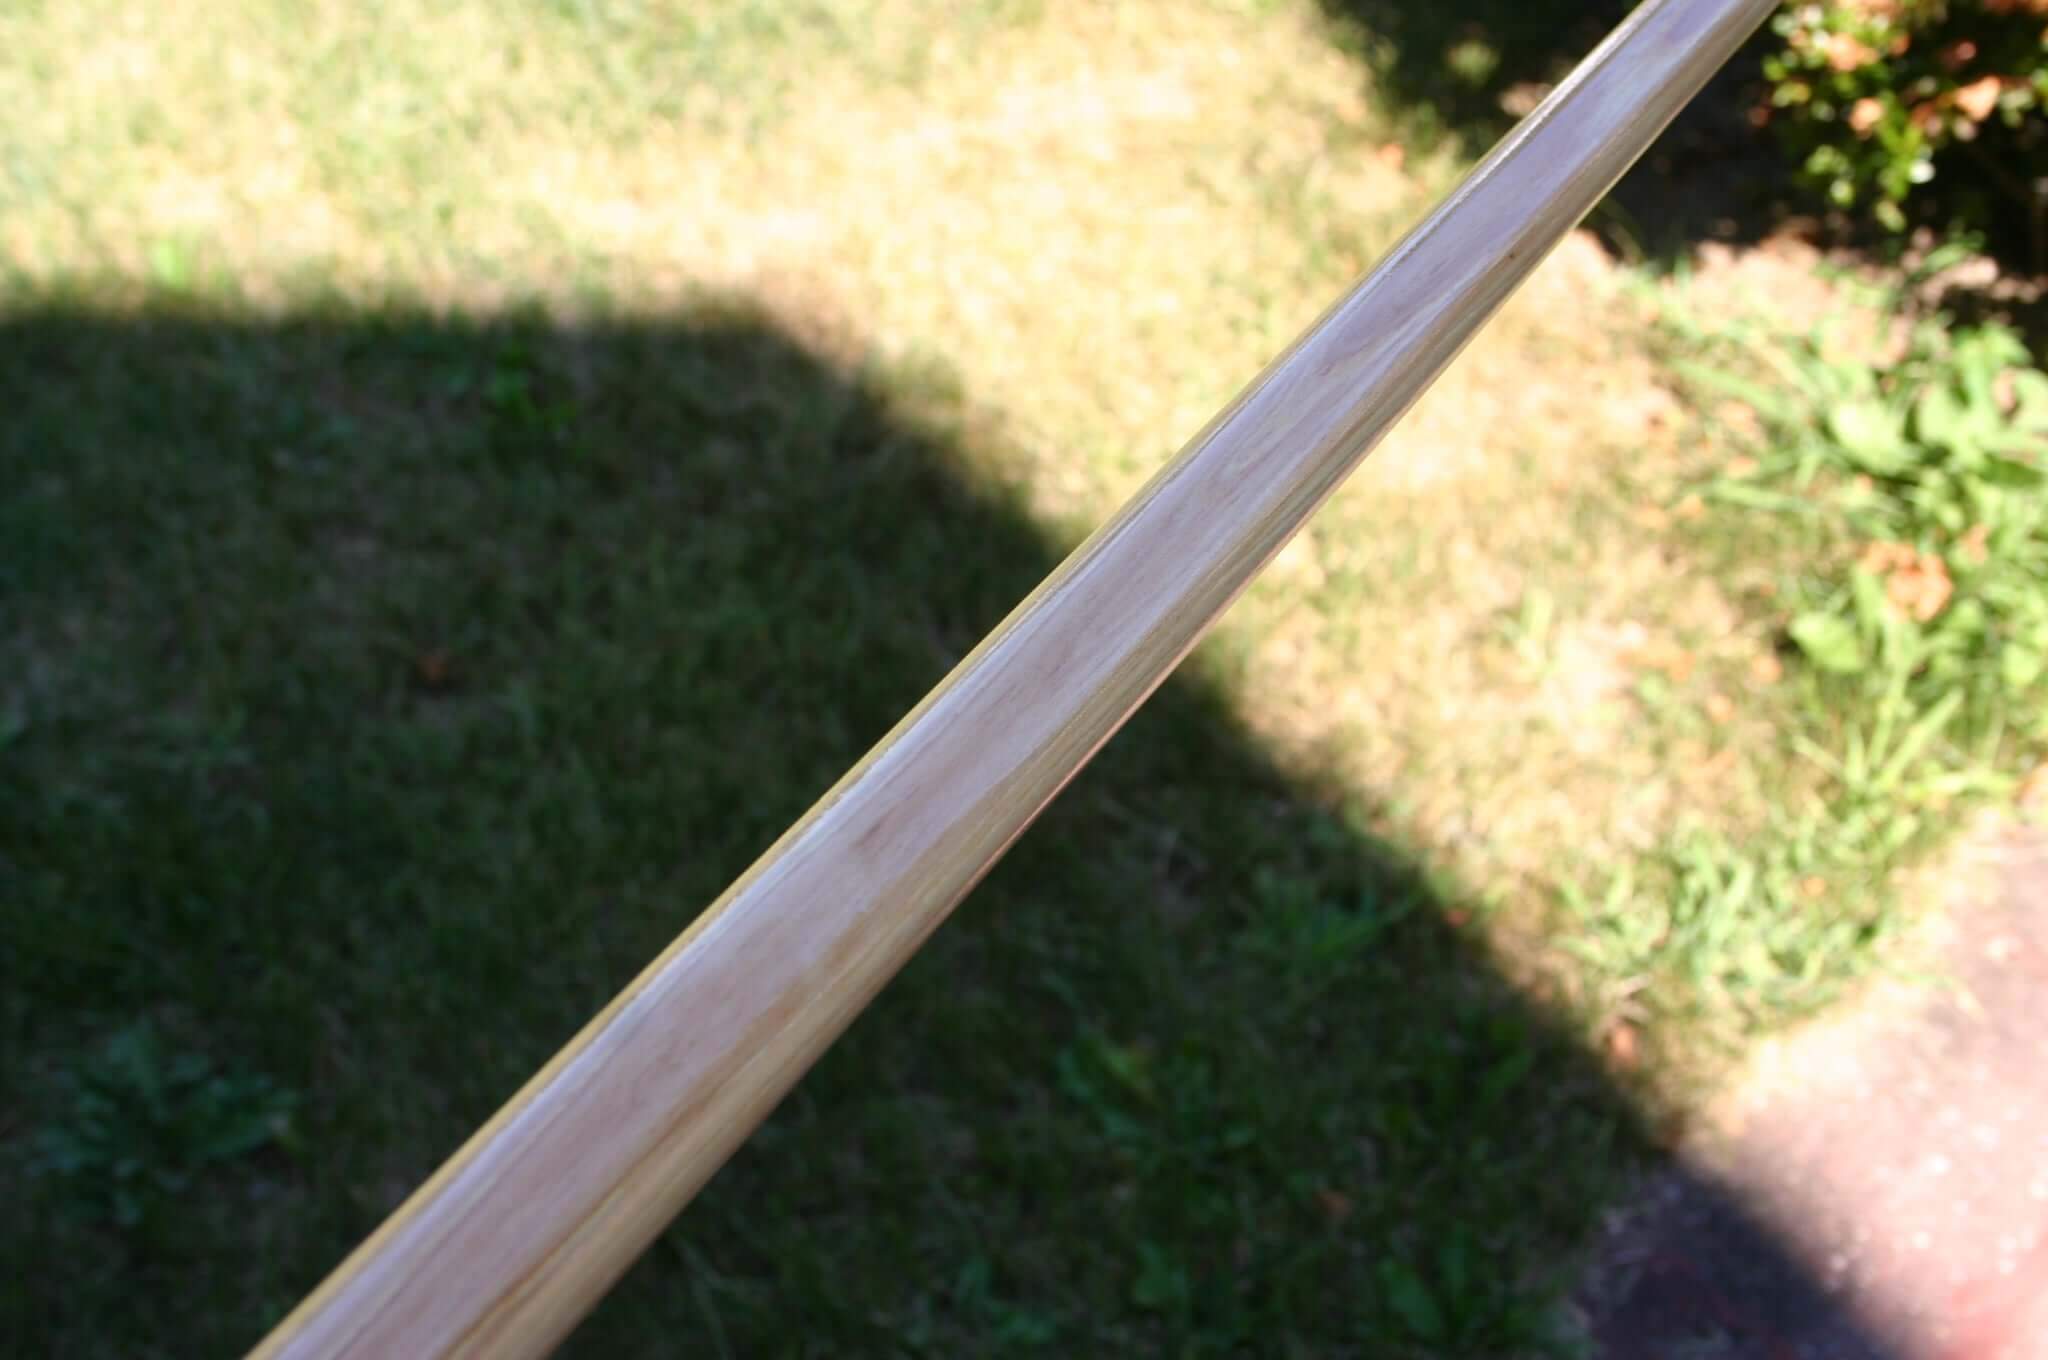 Solid Hickory tapered untapered karate bo staff for contact martial arts training dojo use